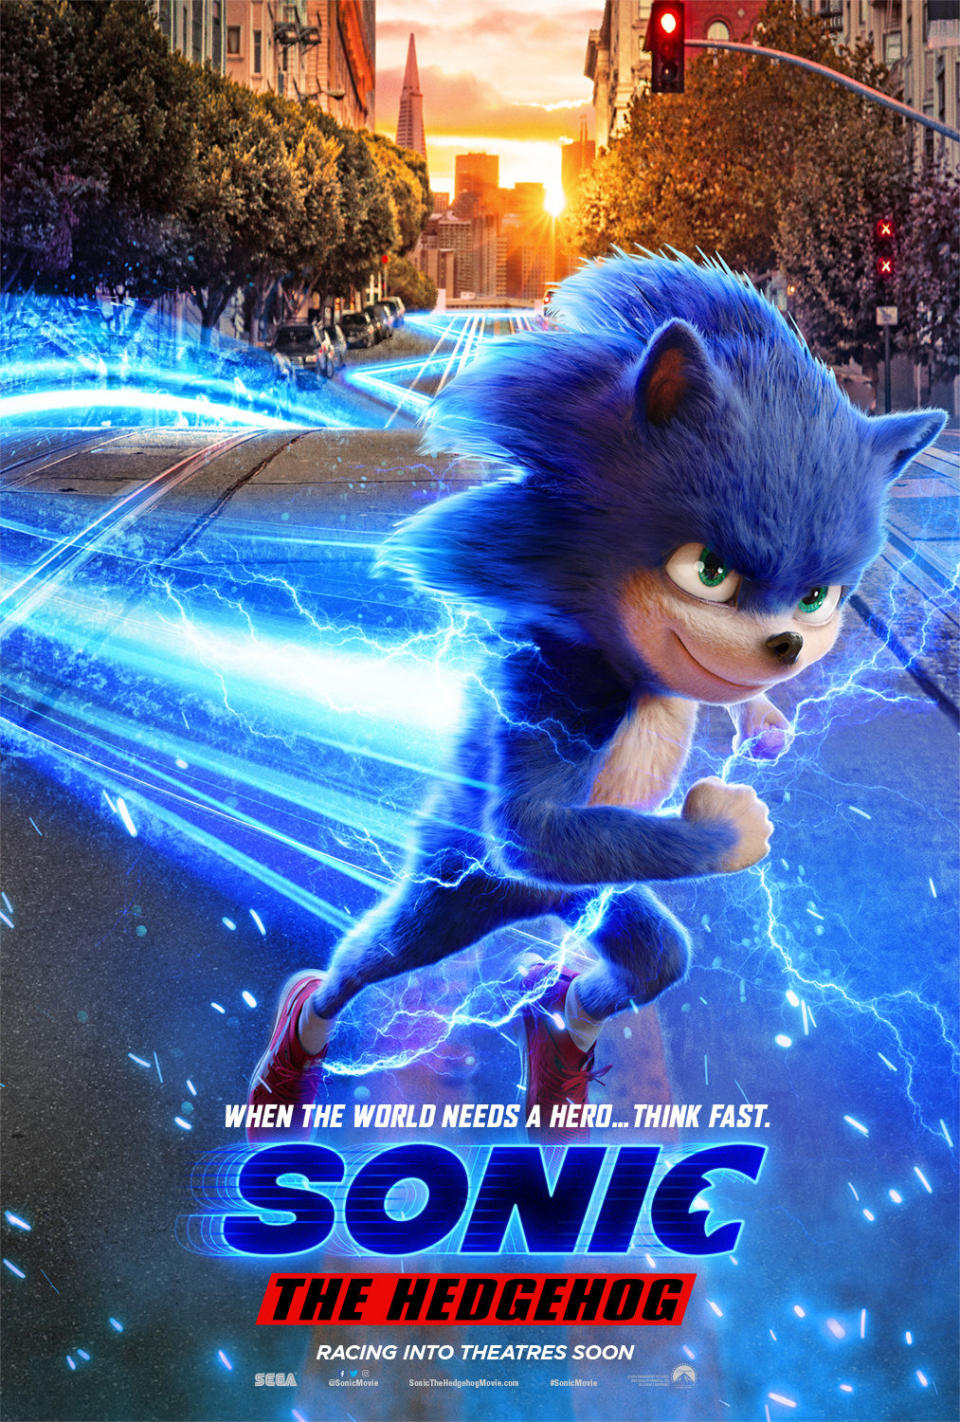 The poster for Sonic's big-screen adventure, though maybe not racing into theatres as soon as they thought (Sony)